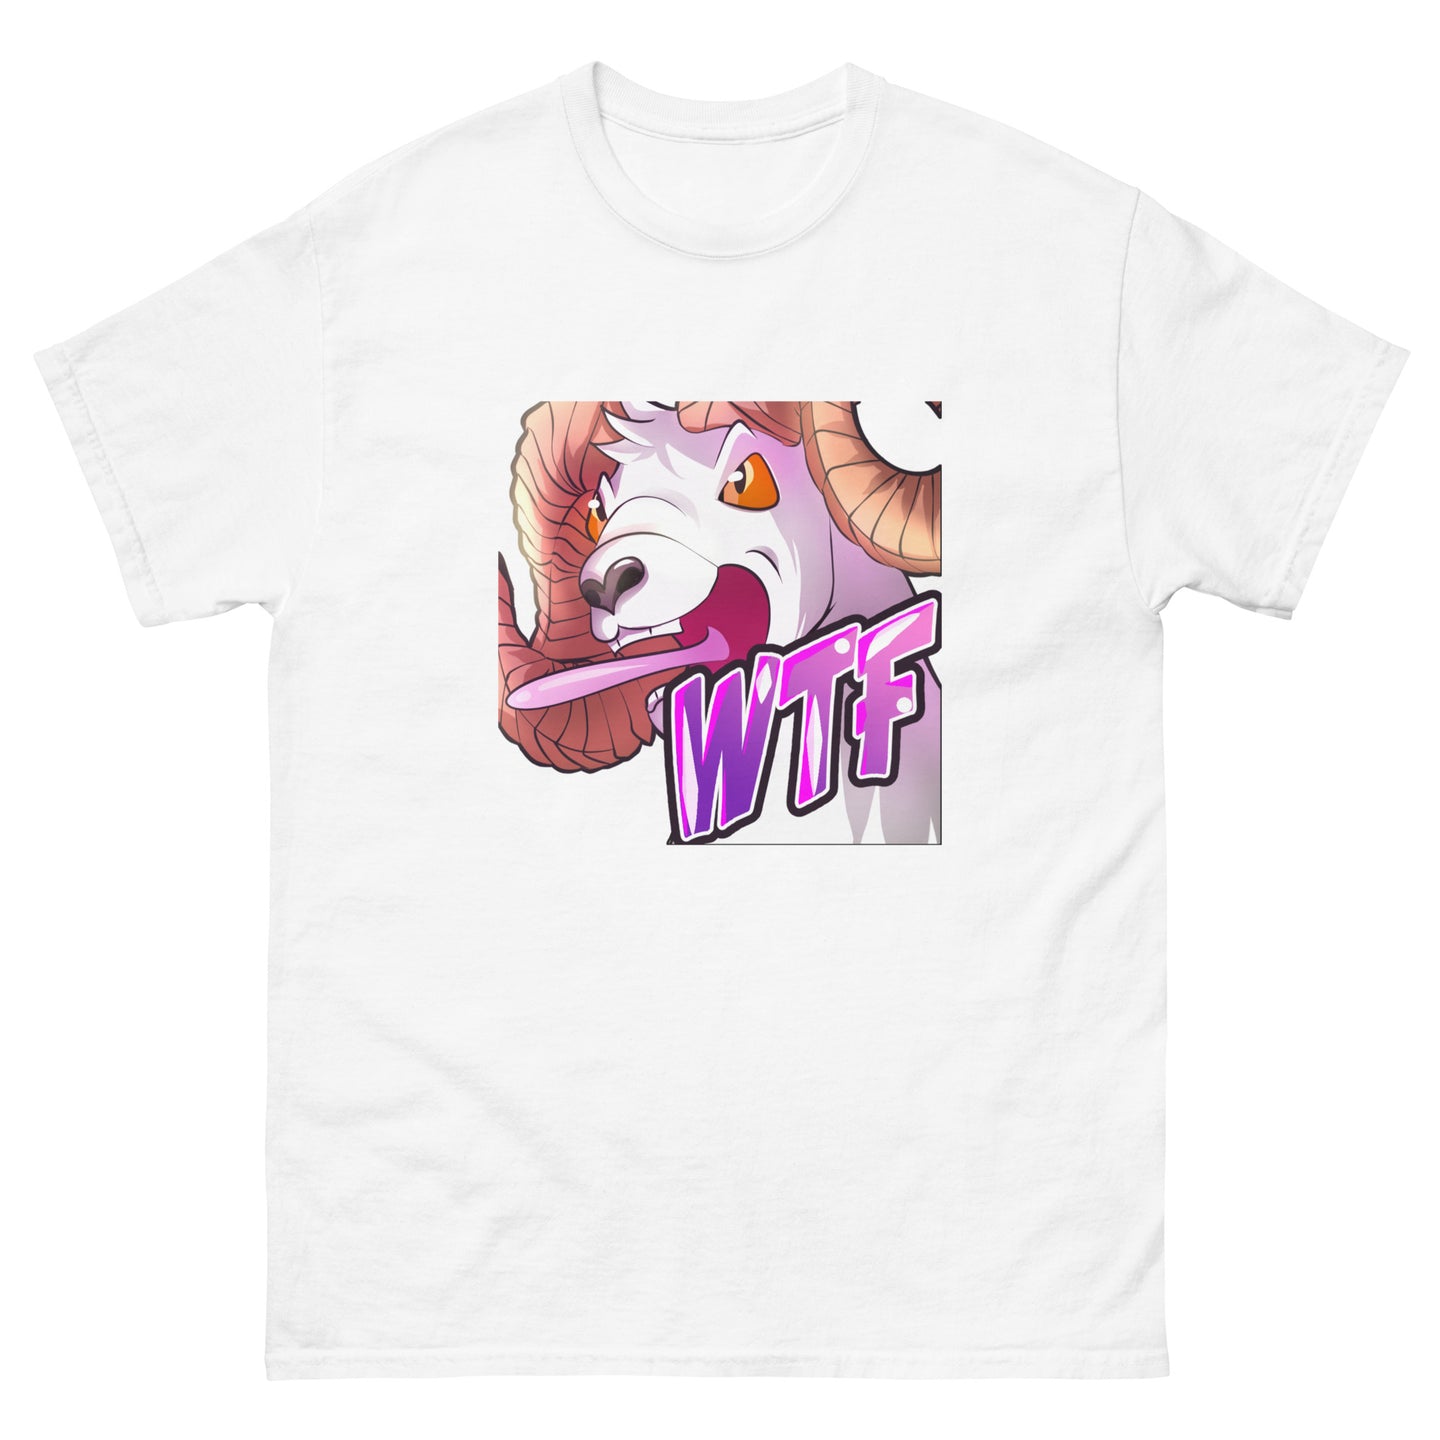 WTF Funny Goat Gamer/Streamer T-Shirt - Soft, Comfortable, and High-Quality